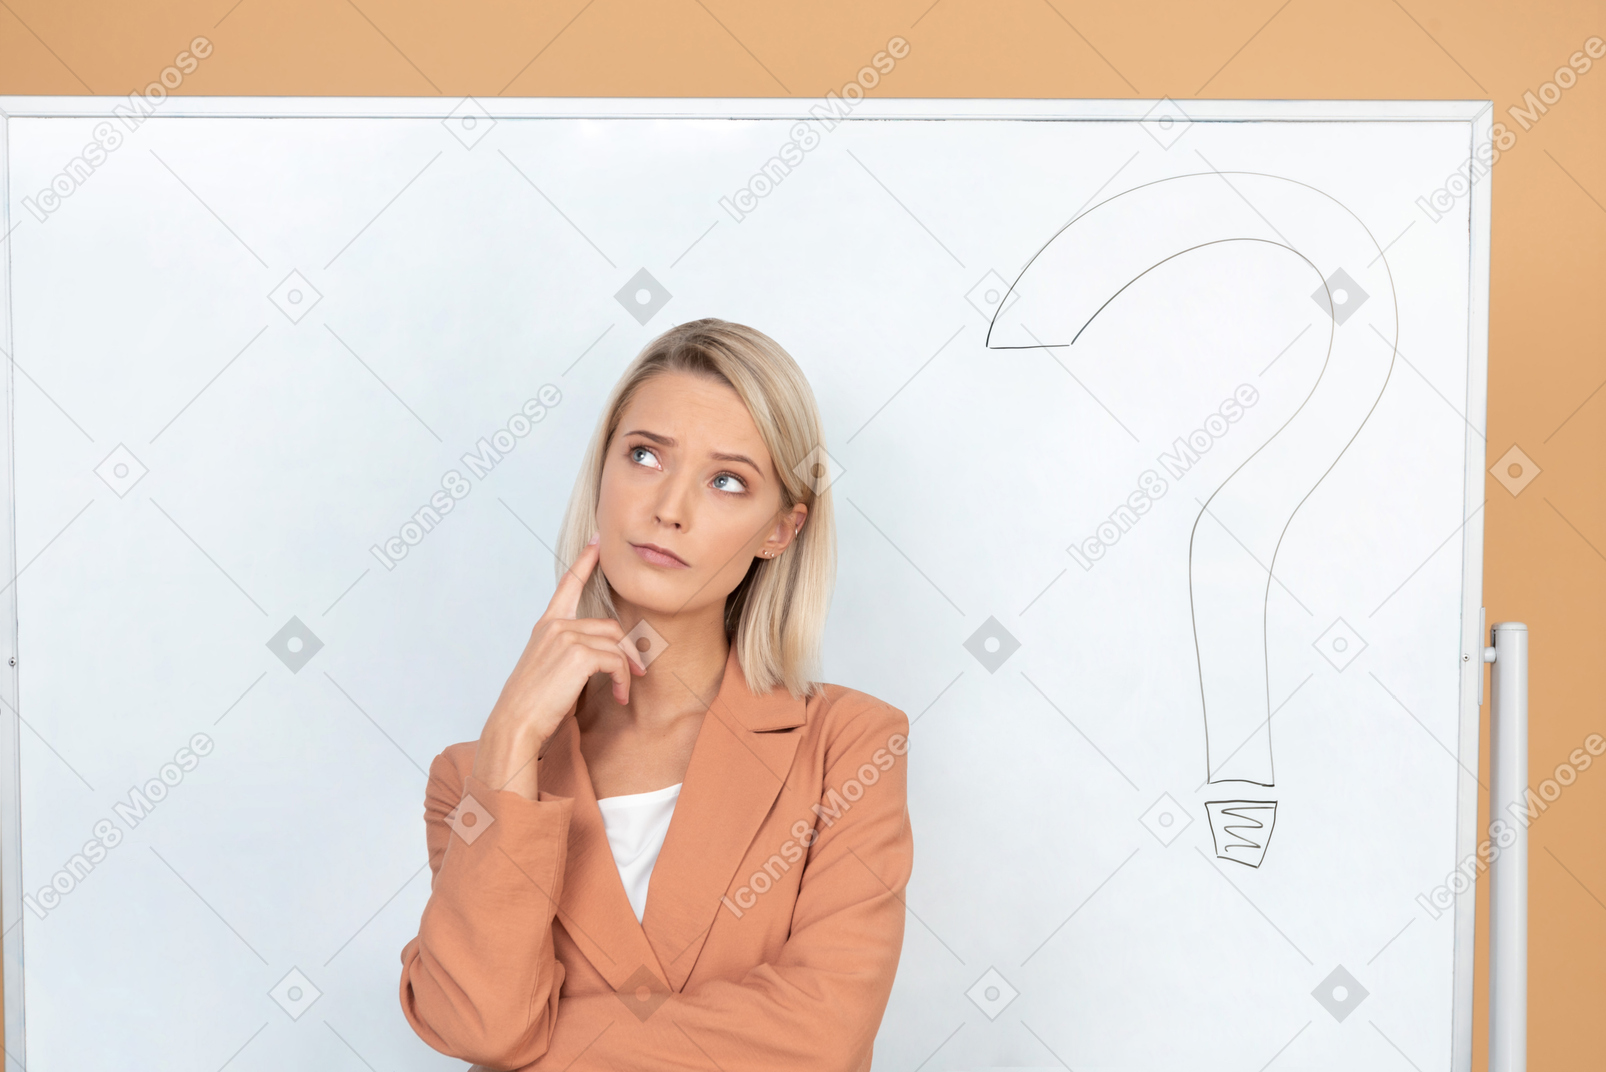 Doubting employee thinking about future plans